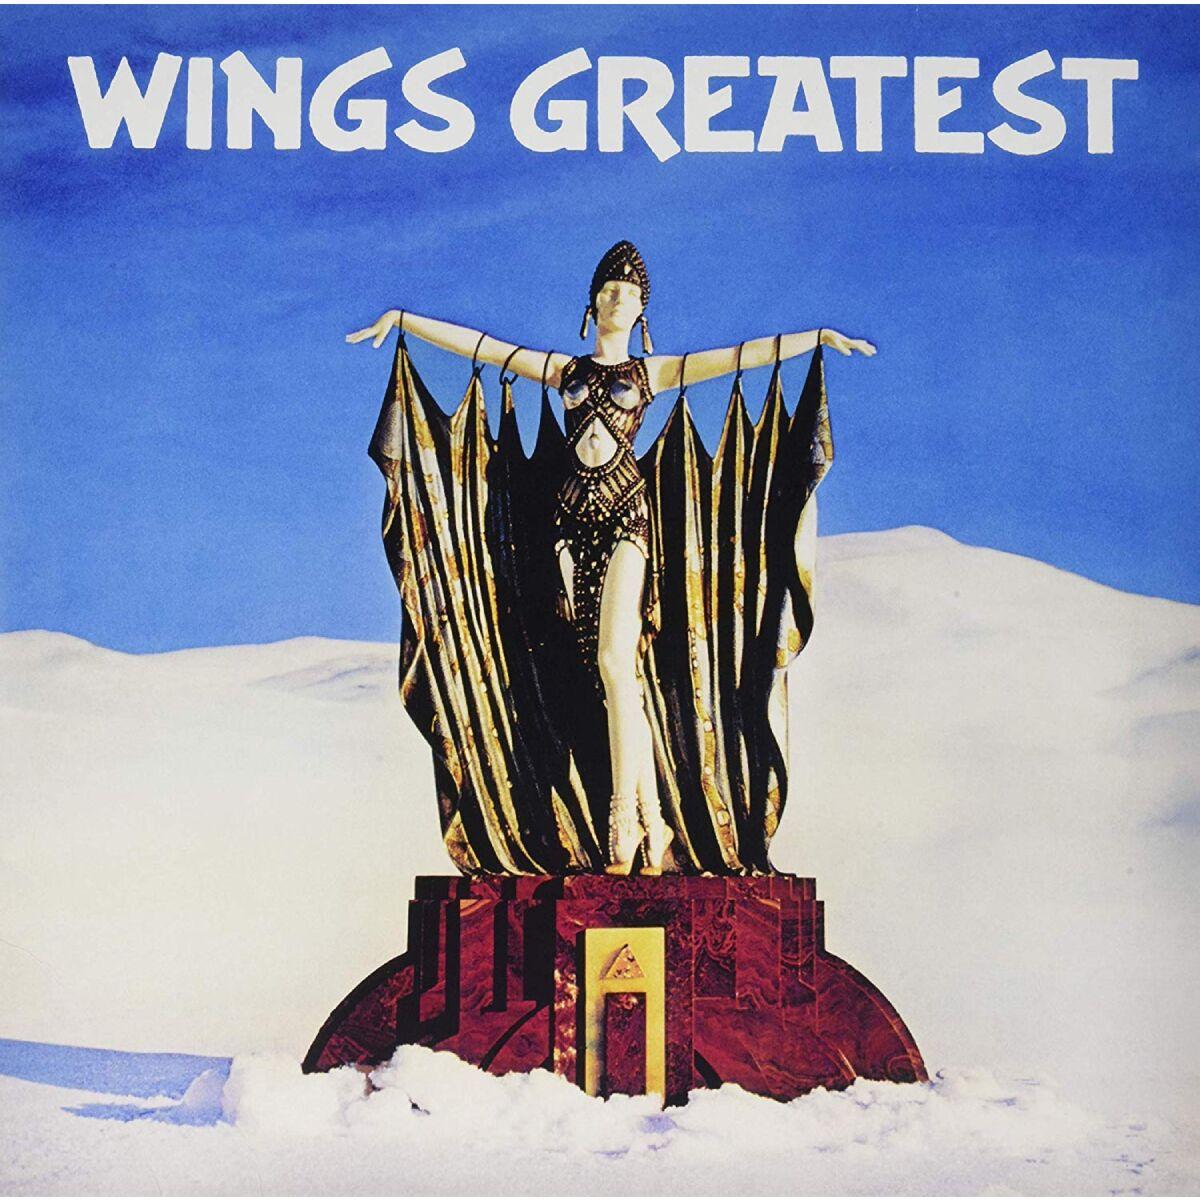 McCartney Paul and Wings Wings Greatest (Limited Edition, Remastered, Blue Vinyl) LP